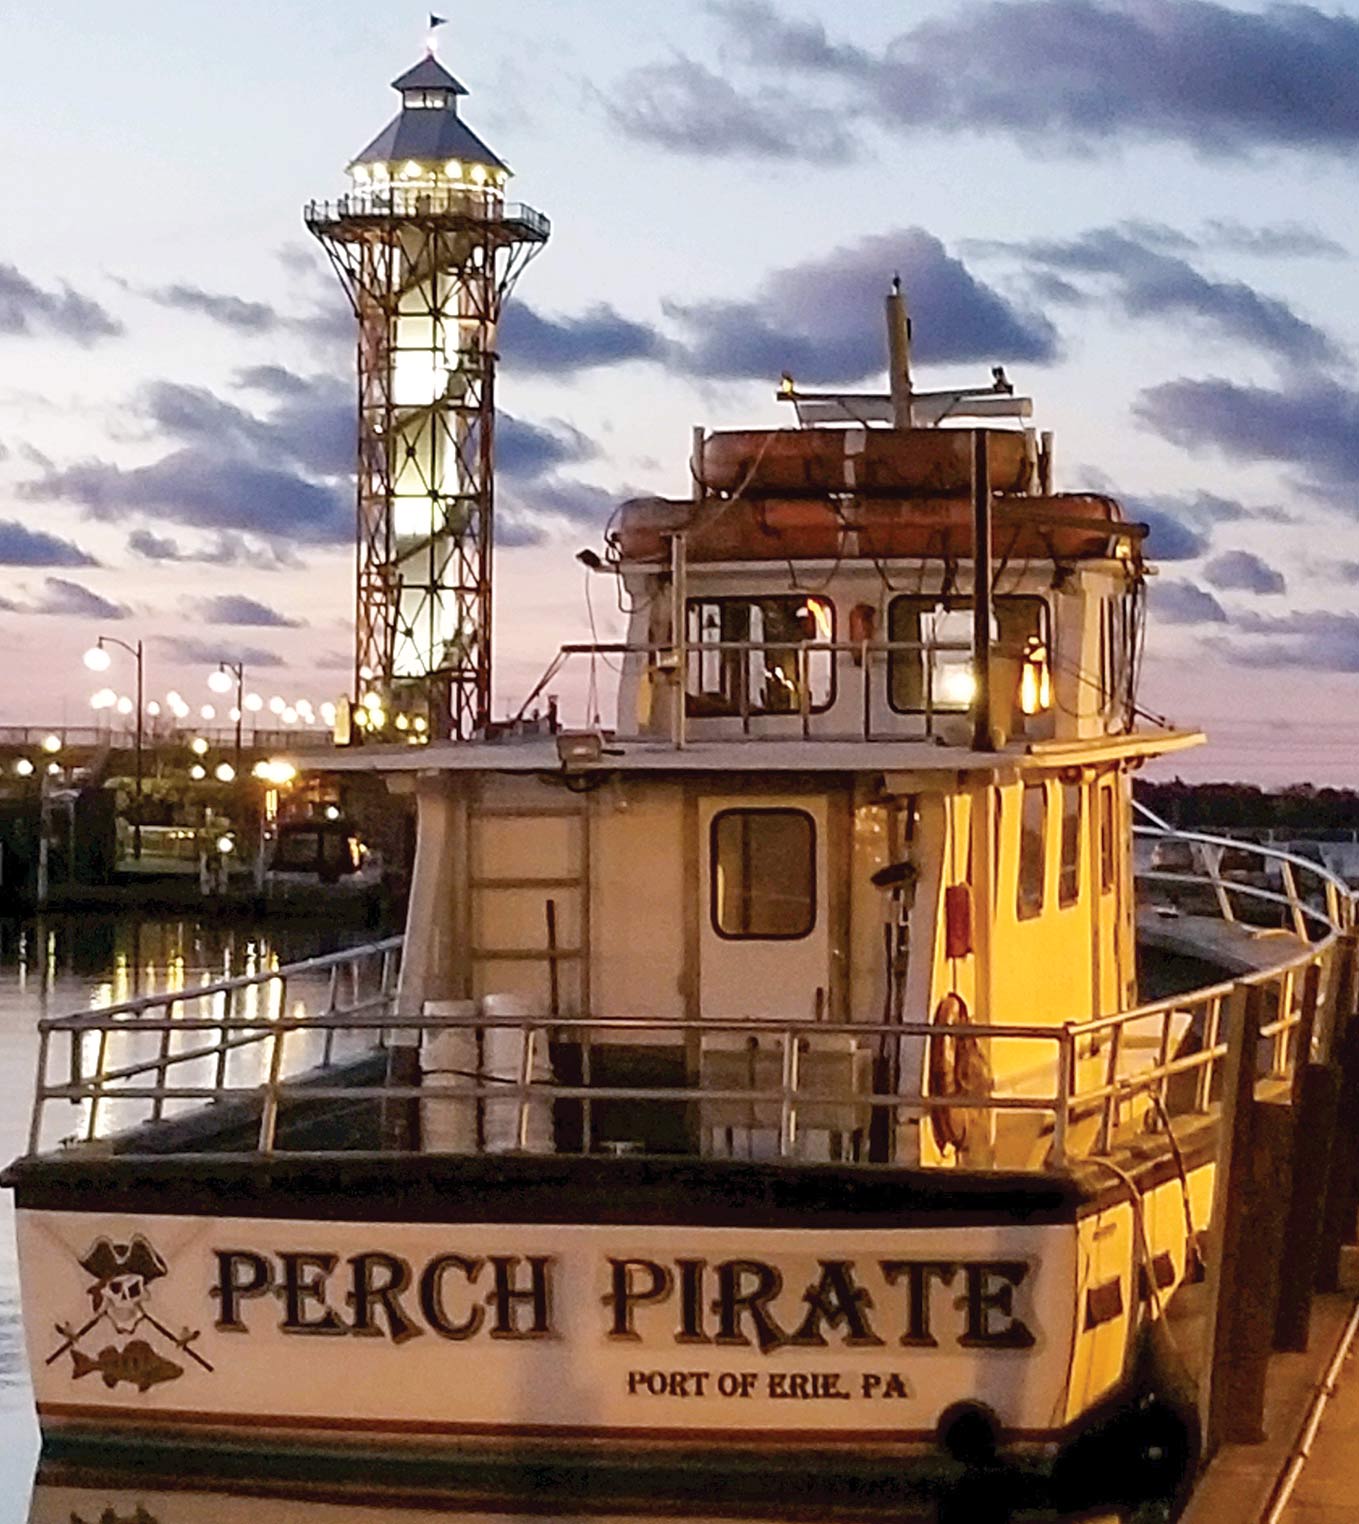 A portrait photograph of the Erie, Pa.-based Perch Pirate docked at sunset